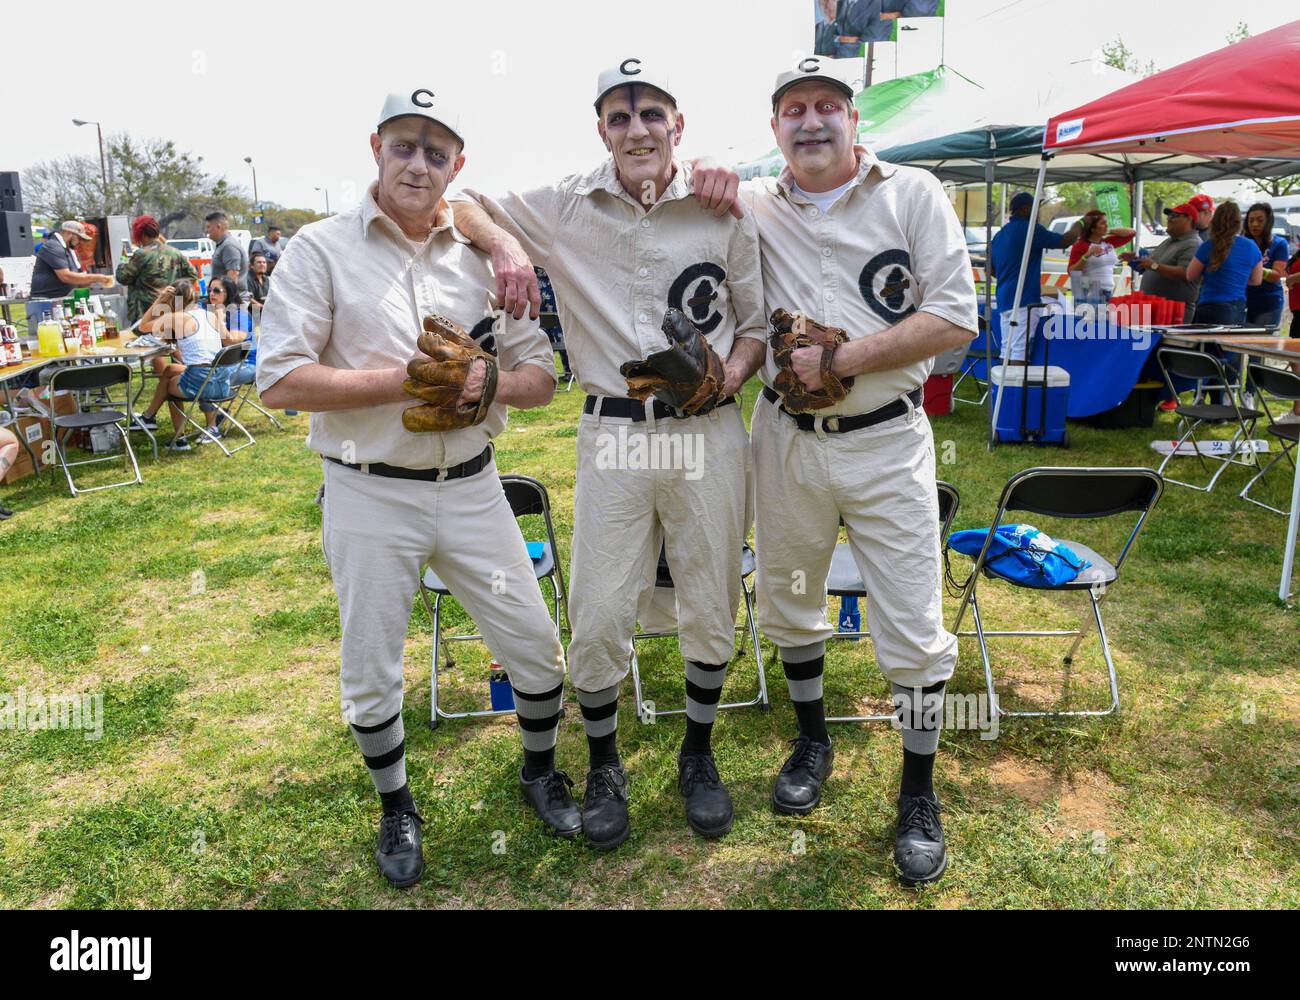 Mar 28, 2019: Fans dress up as the 1908 Chicago Cubs as they